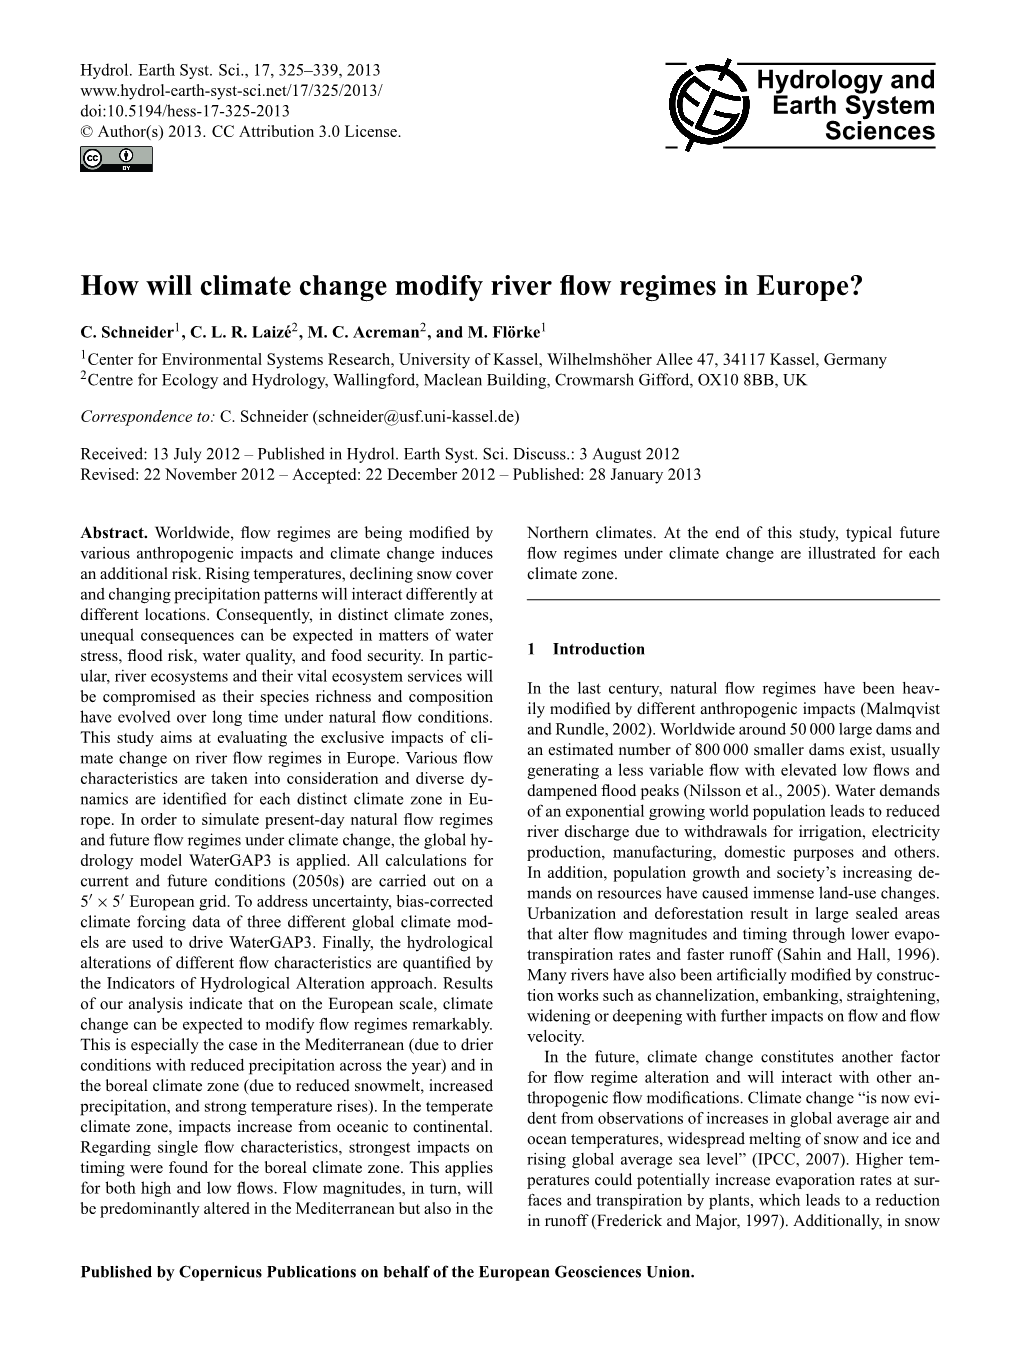 How Will Climate Change Modify River Flow Regimes in Europe?